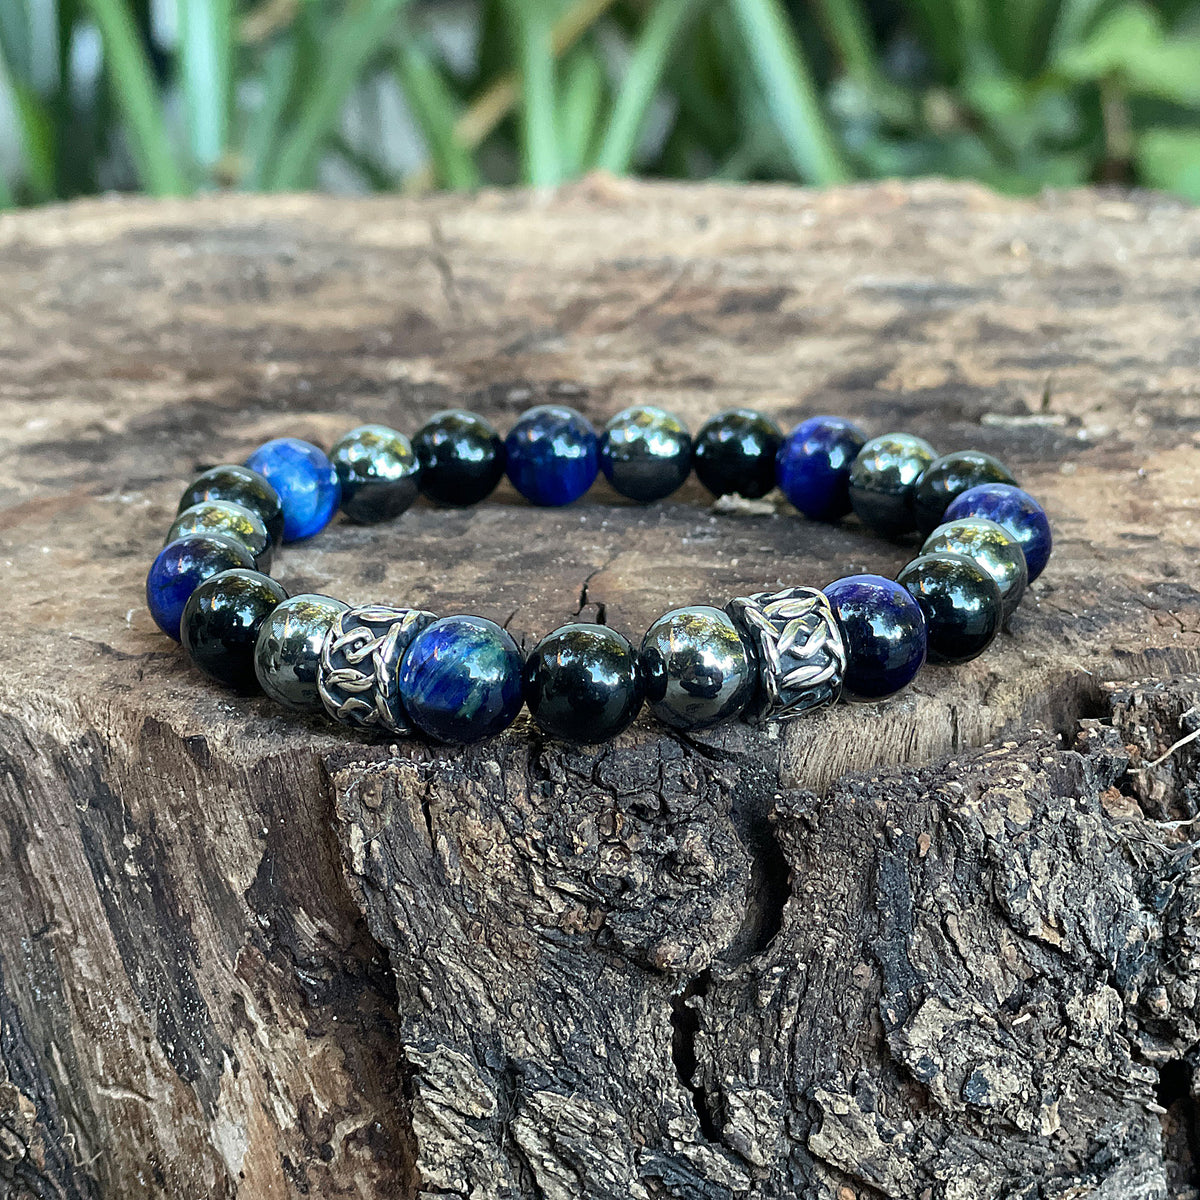 The Triple Protection bracelet 10mm - 3 of the most powerful crystals combined to create perfection. The Triple Protection Bracelet is one of our most sought after bracelets, boasting some of the most incredible gems around. Blue Tiger’s eye, black Obsidian and Hematite is the powerhouse of beads when combined into one.